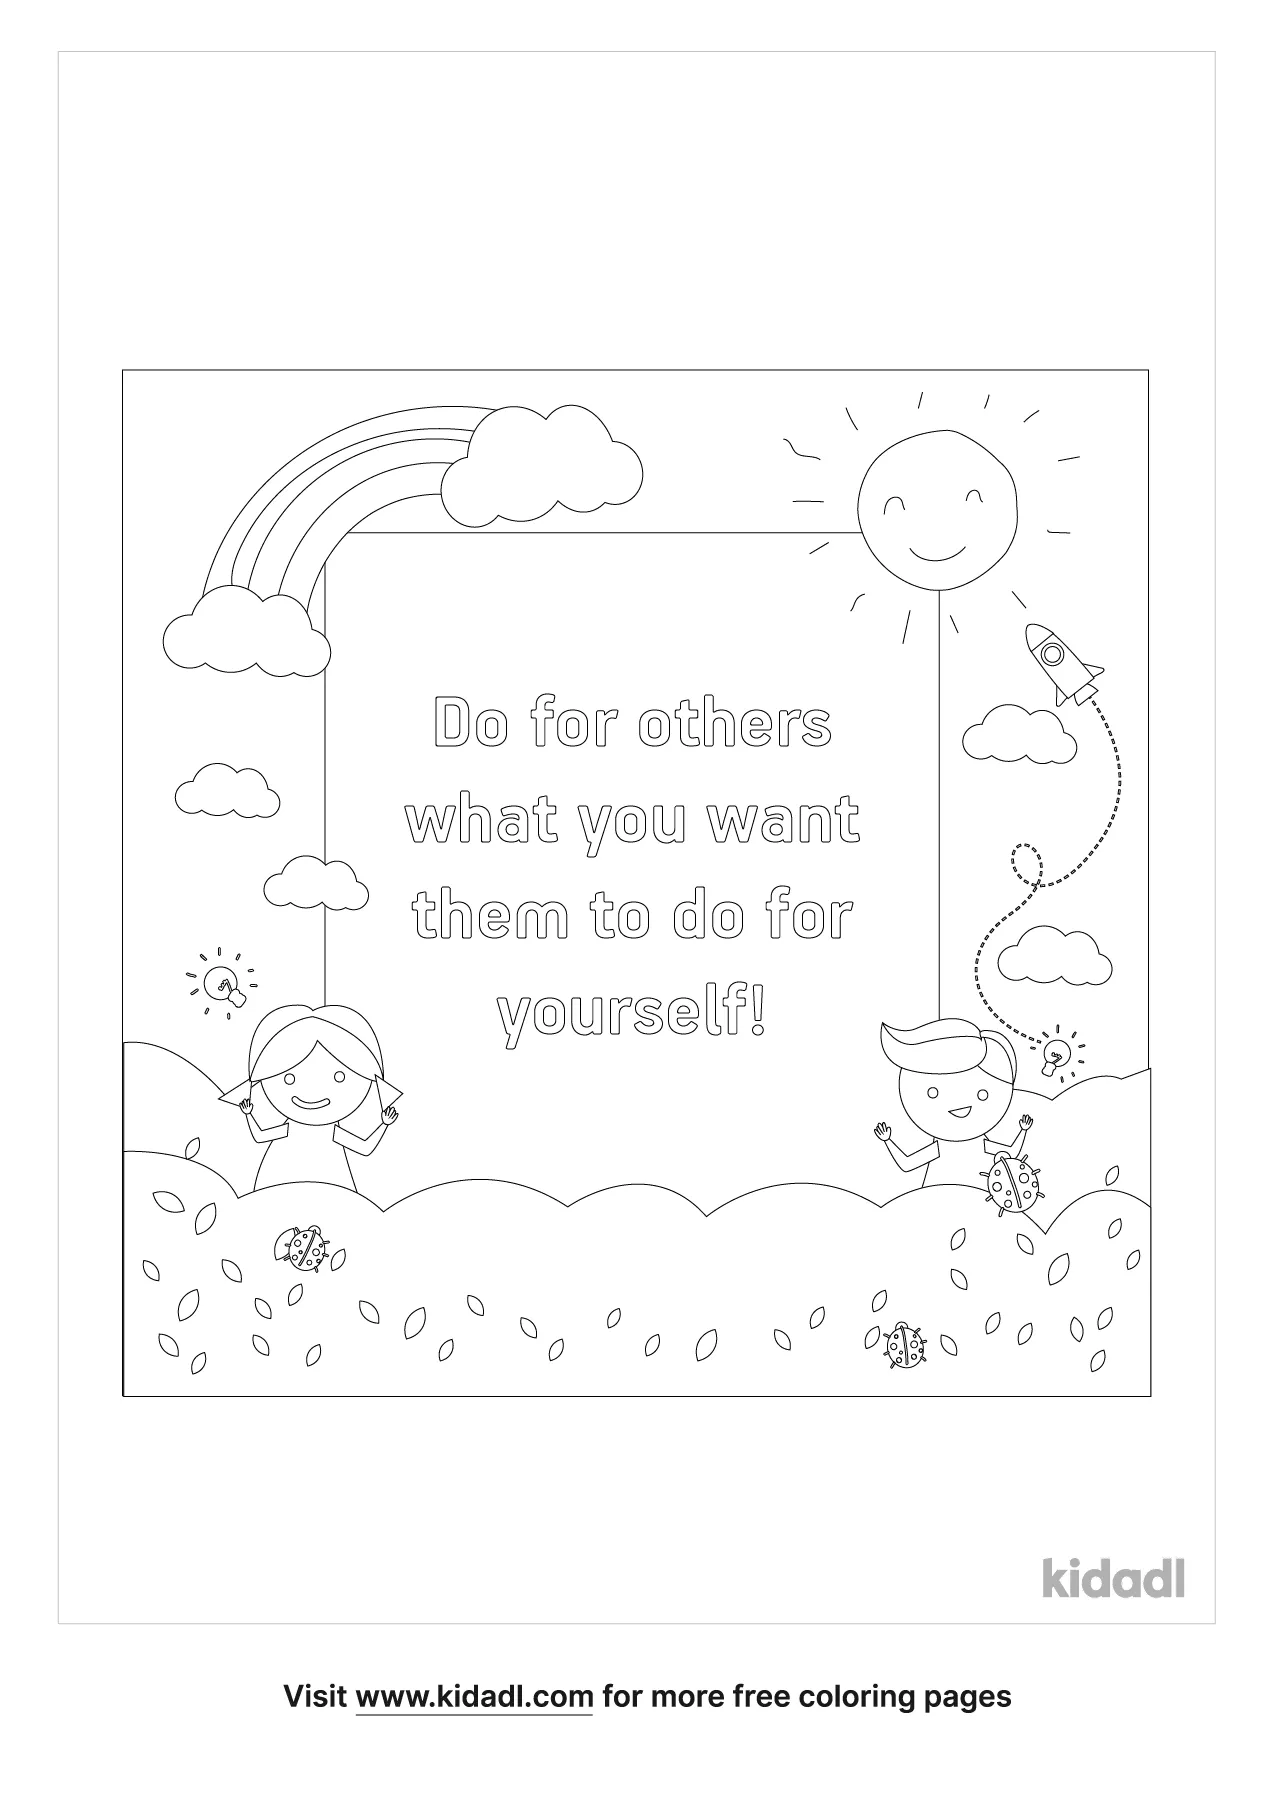 the golden rule coloring pages